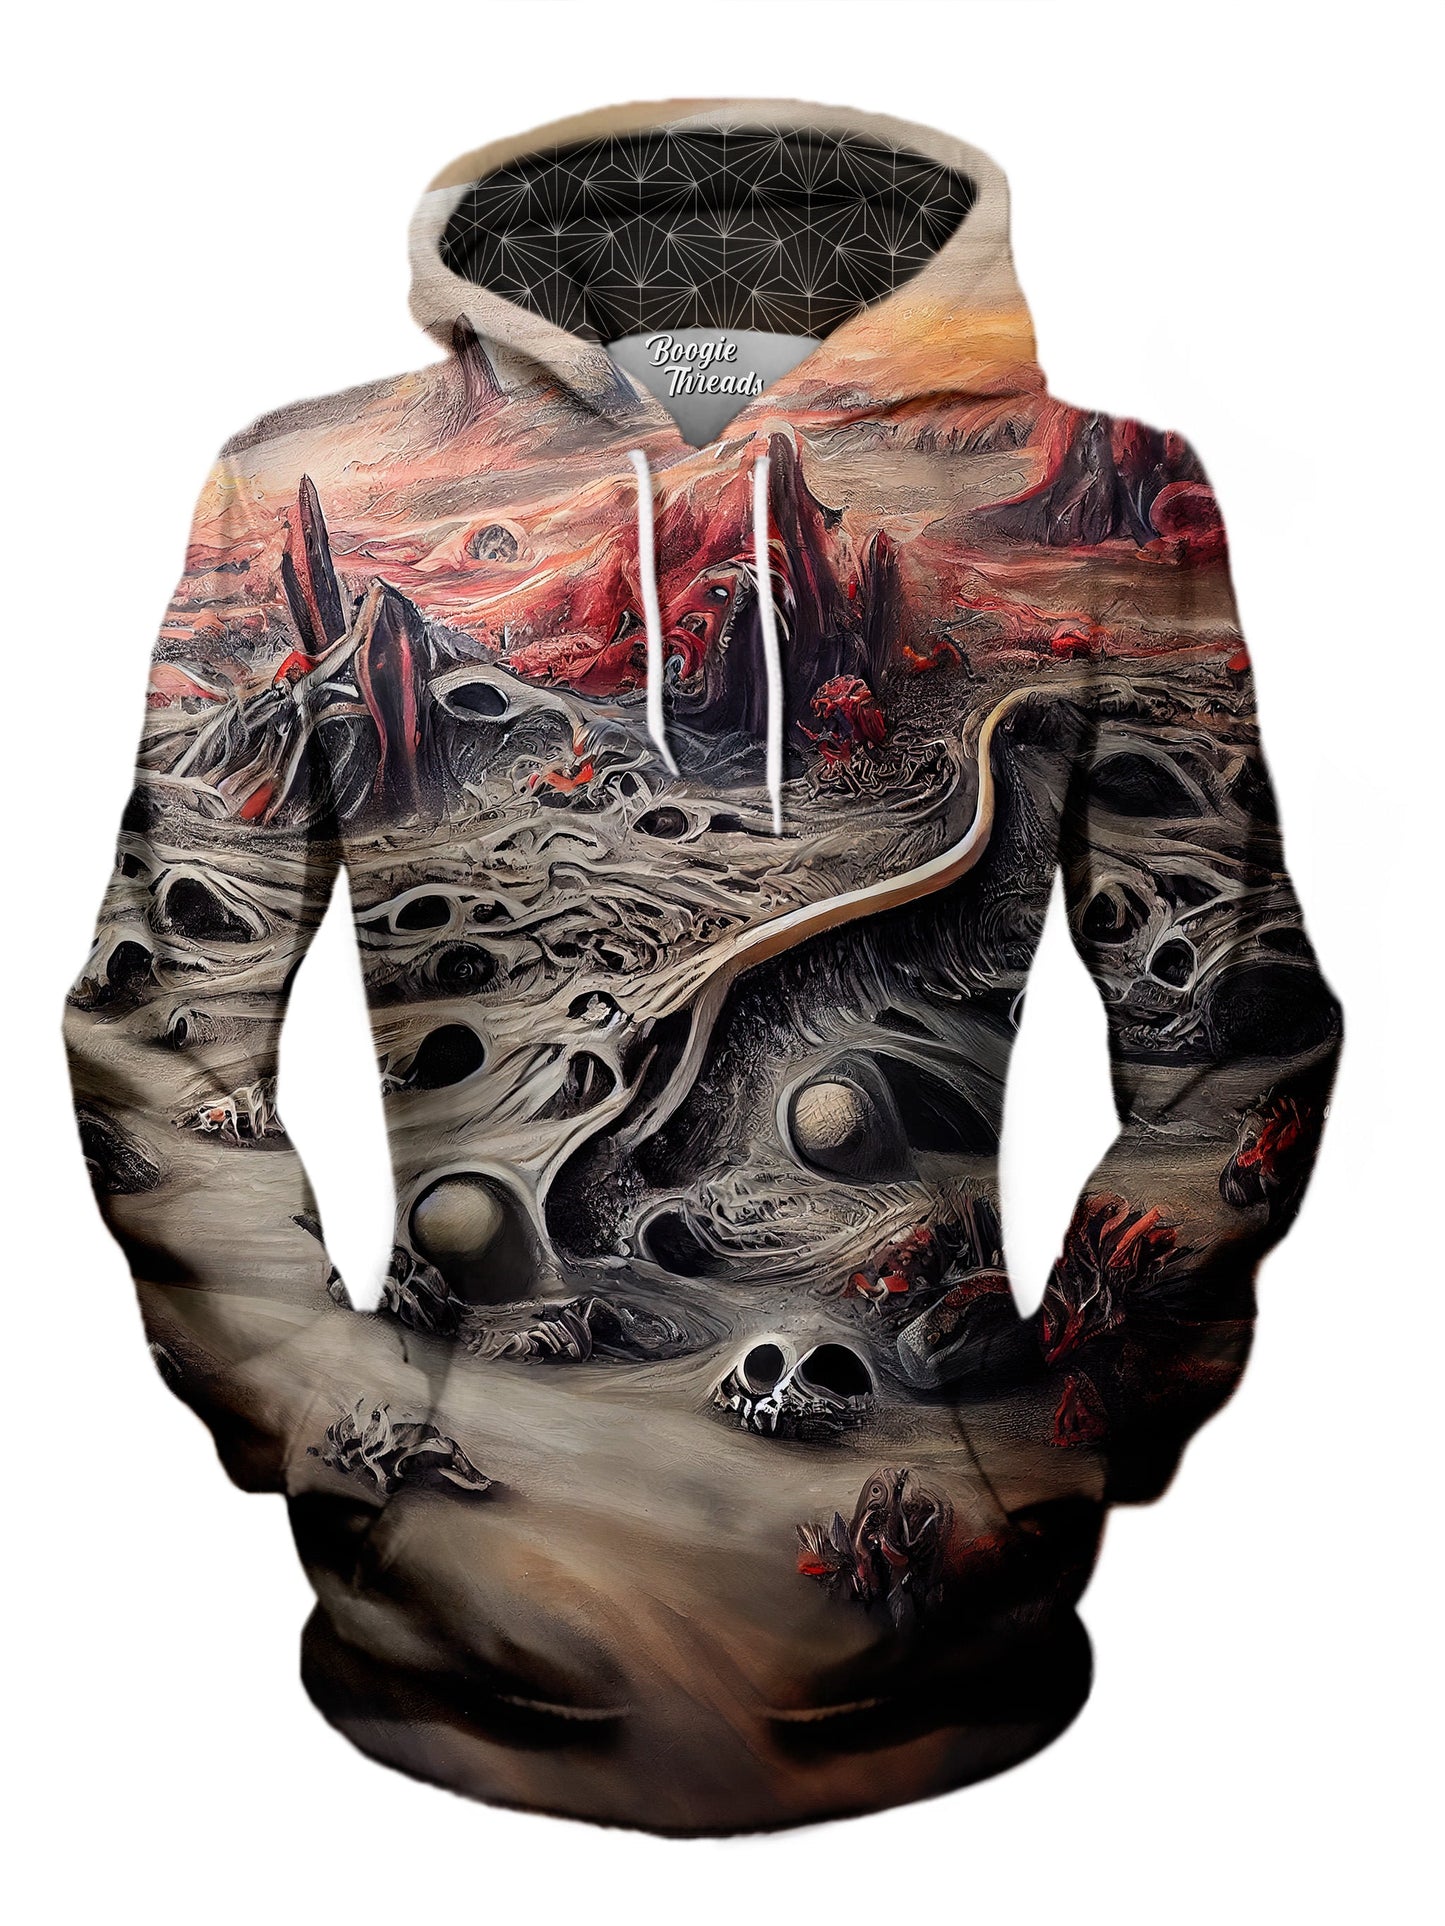 Discovery Of Grace Unisex Pullover Hoodie - EDM Festival Clothing - Boogie Threads